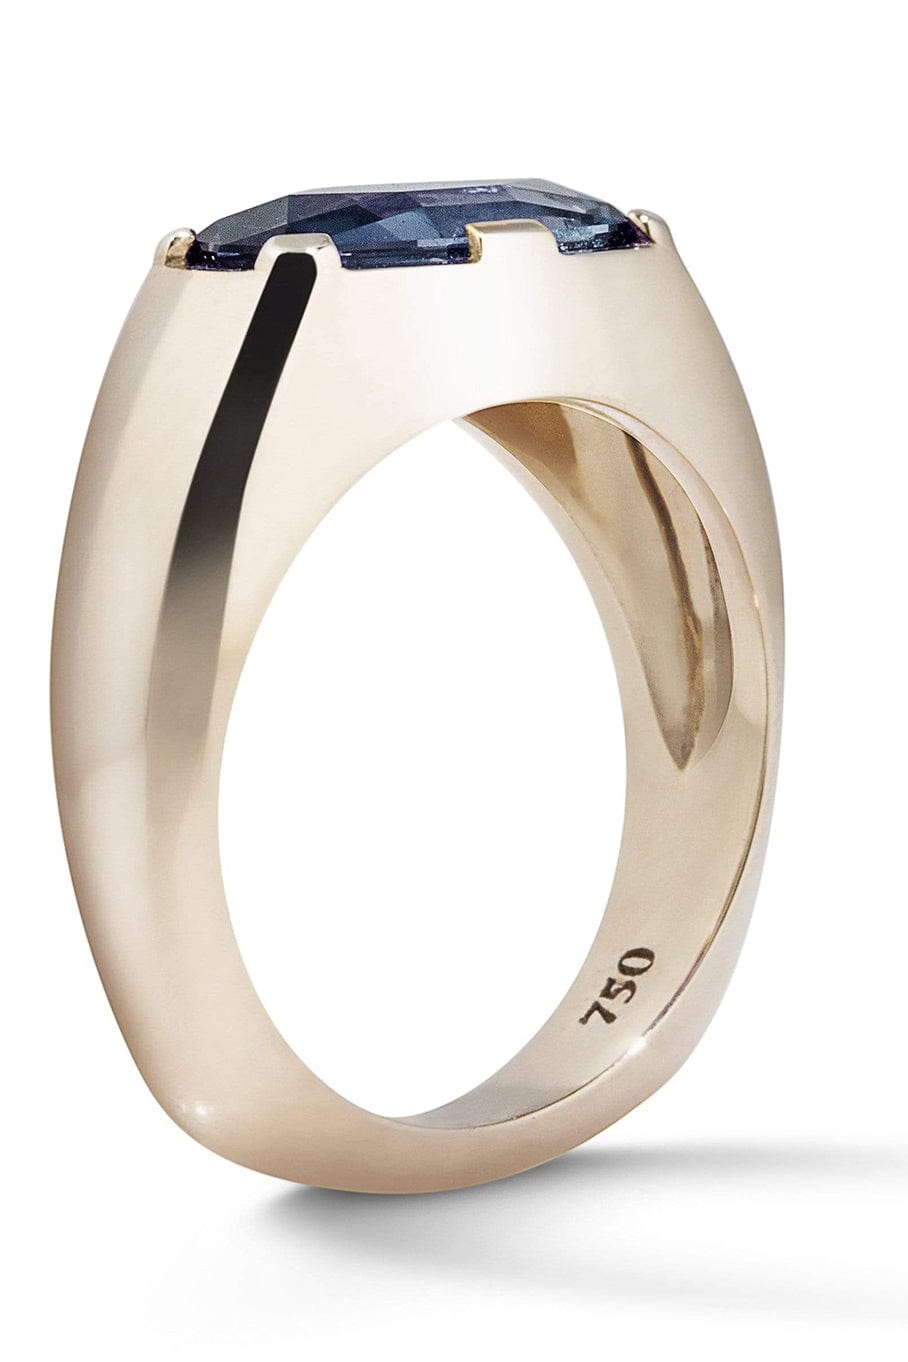 ANDY LIF-Blue Sapphire Roma Ring-WHITE GOLD